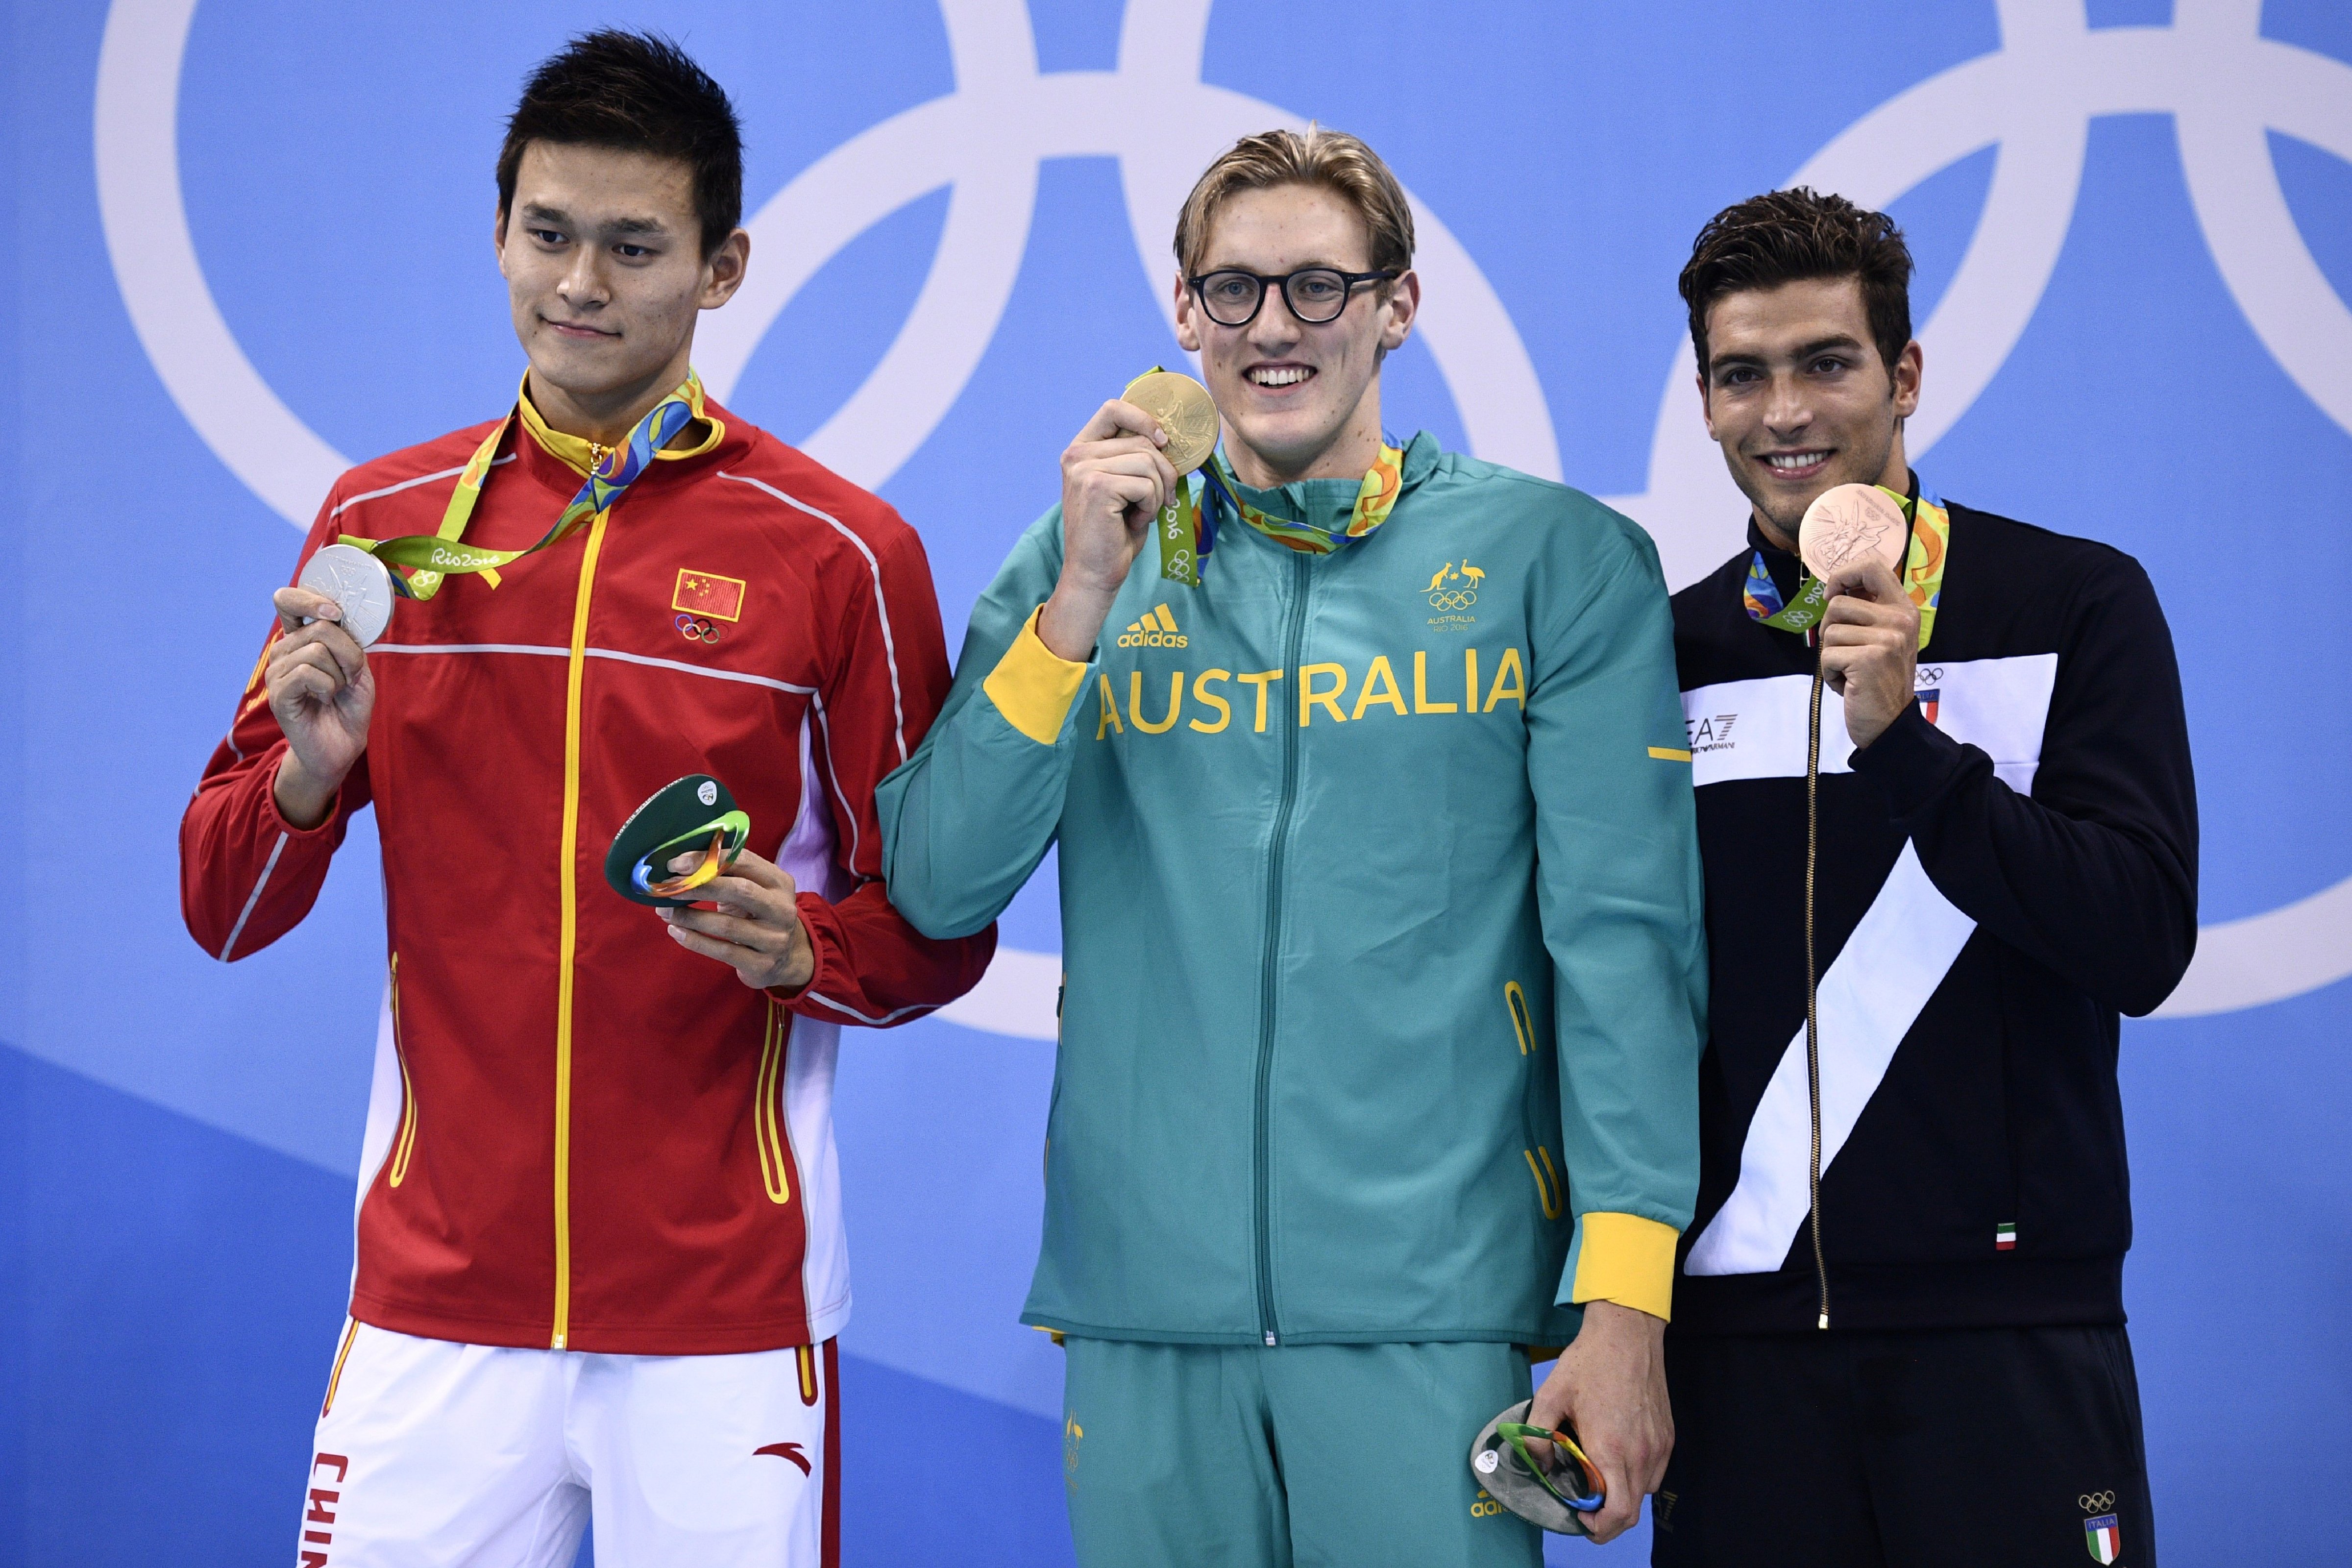 Australia's Mack Horton, center, poses on the podium with silver medallist China's Sun Yang, left, and bronze medallist Italy's Grabriele Detti after he won the Men's 400m Freestyle Final during the swimming event at the Rio 2016 Olympic Games at the Olympic Aquatics Stadium on Aug. 6, 2016. (Martin Bureau—AFP/Getty Images)